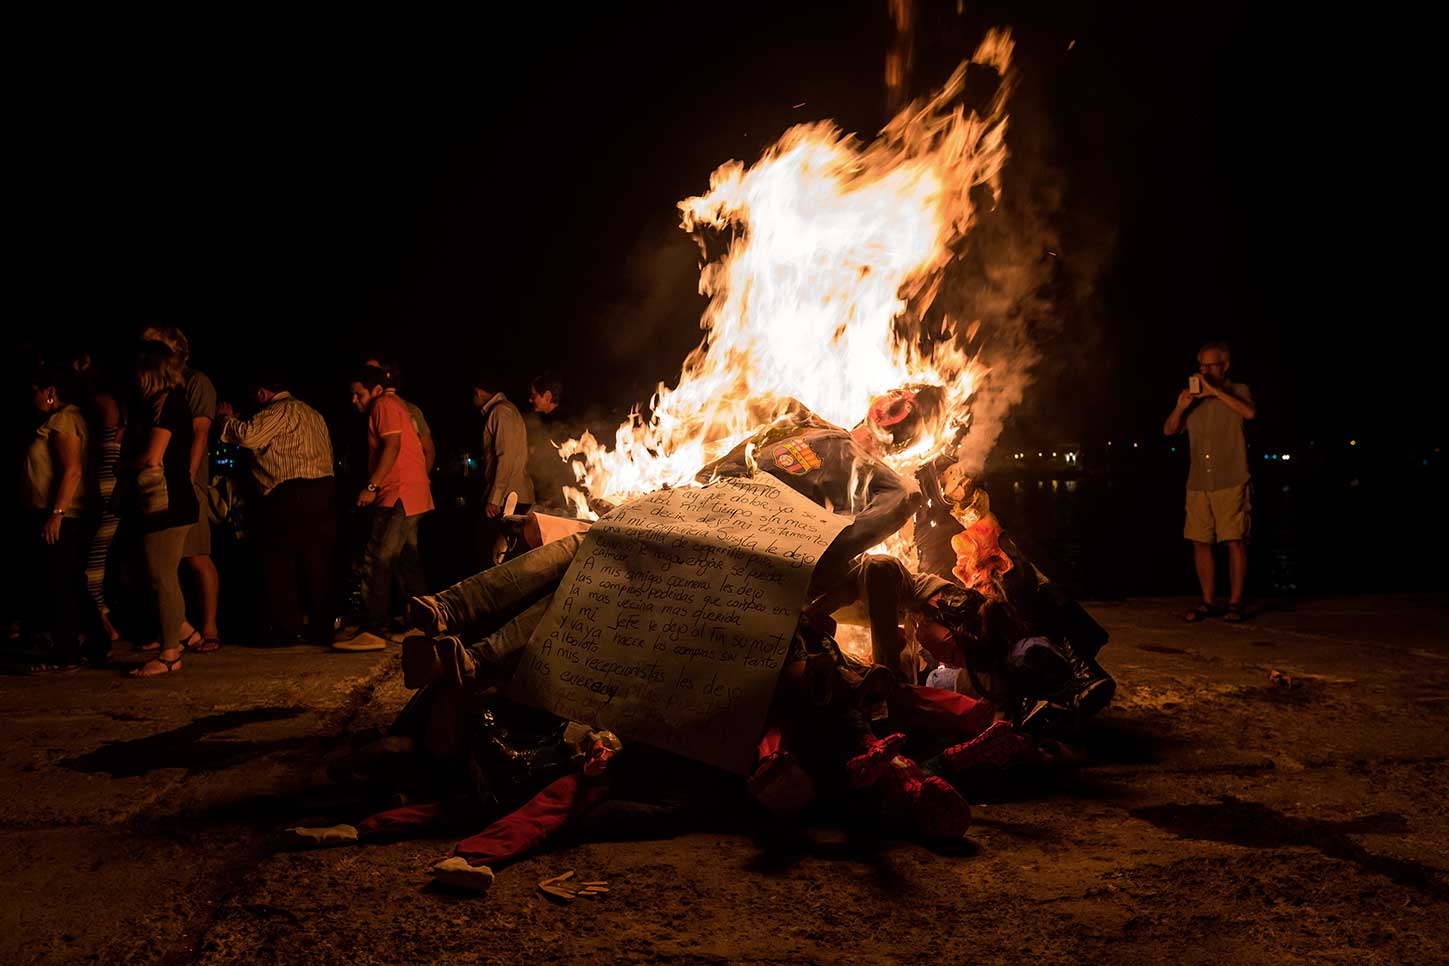 Discover Latin America's most interesting New Year's rituals